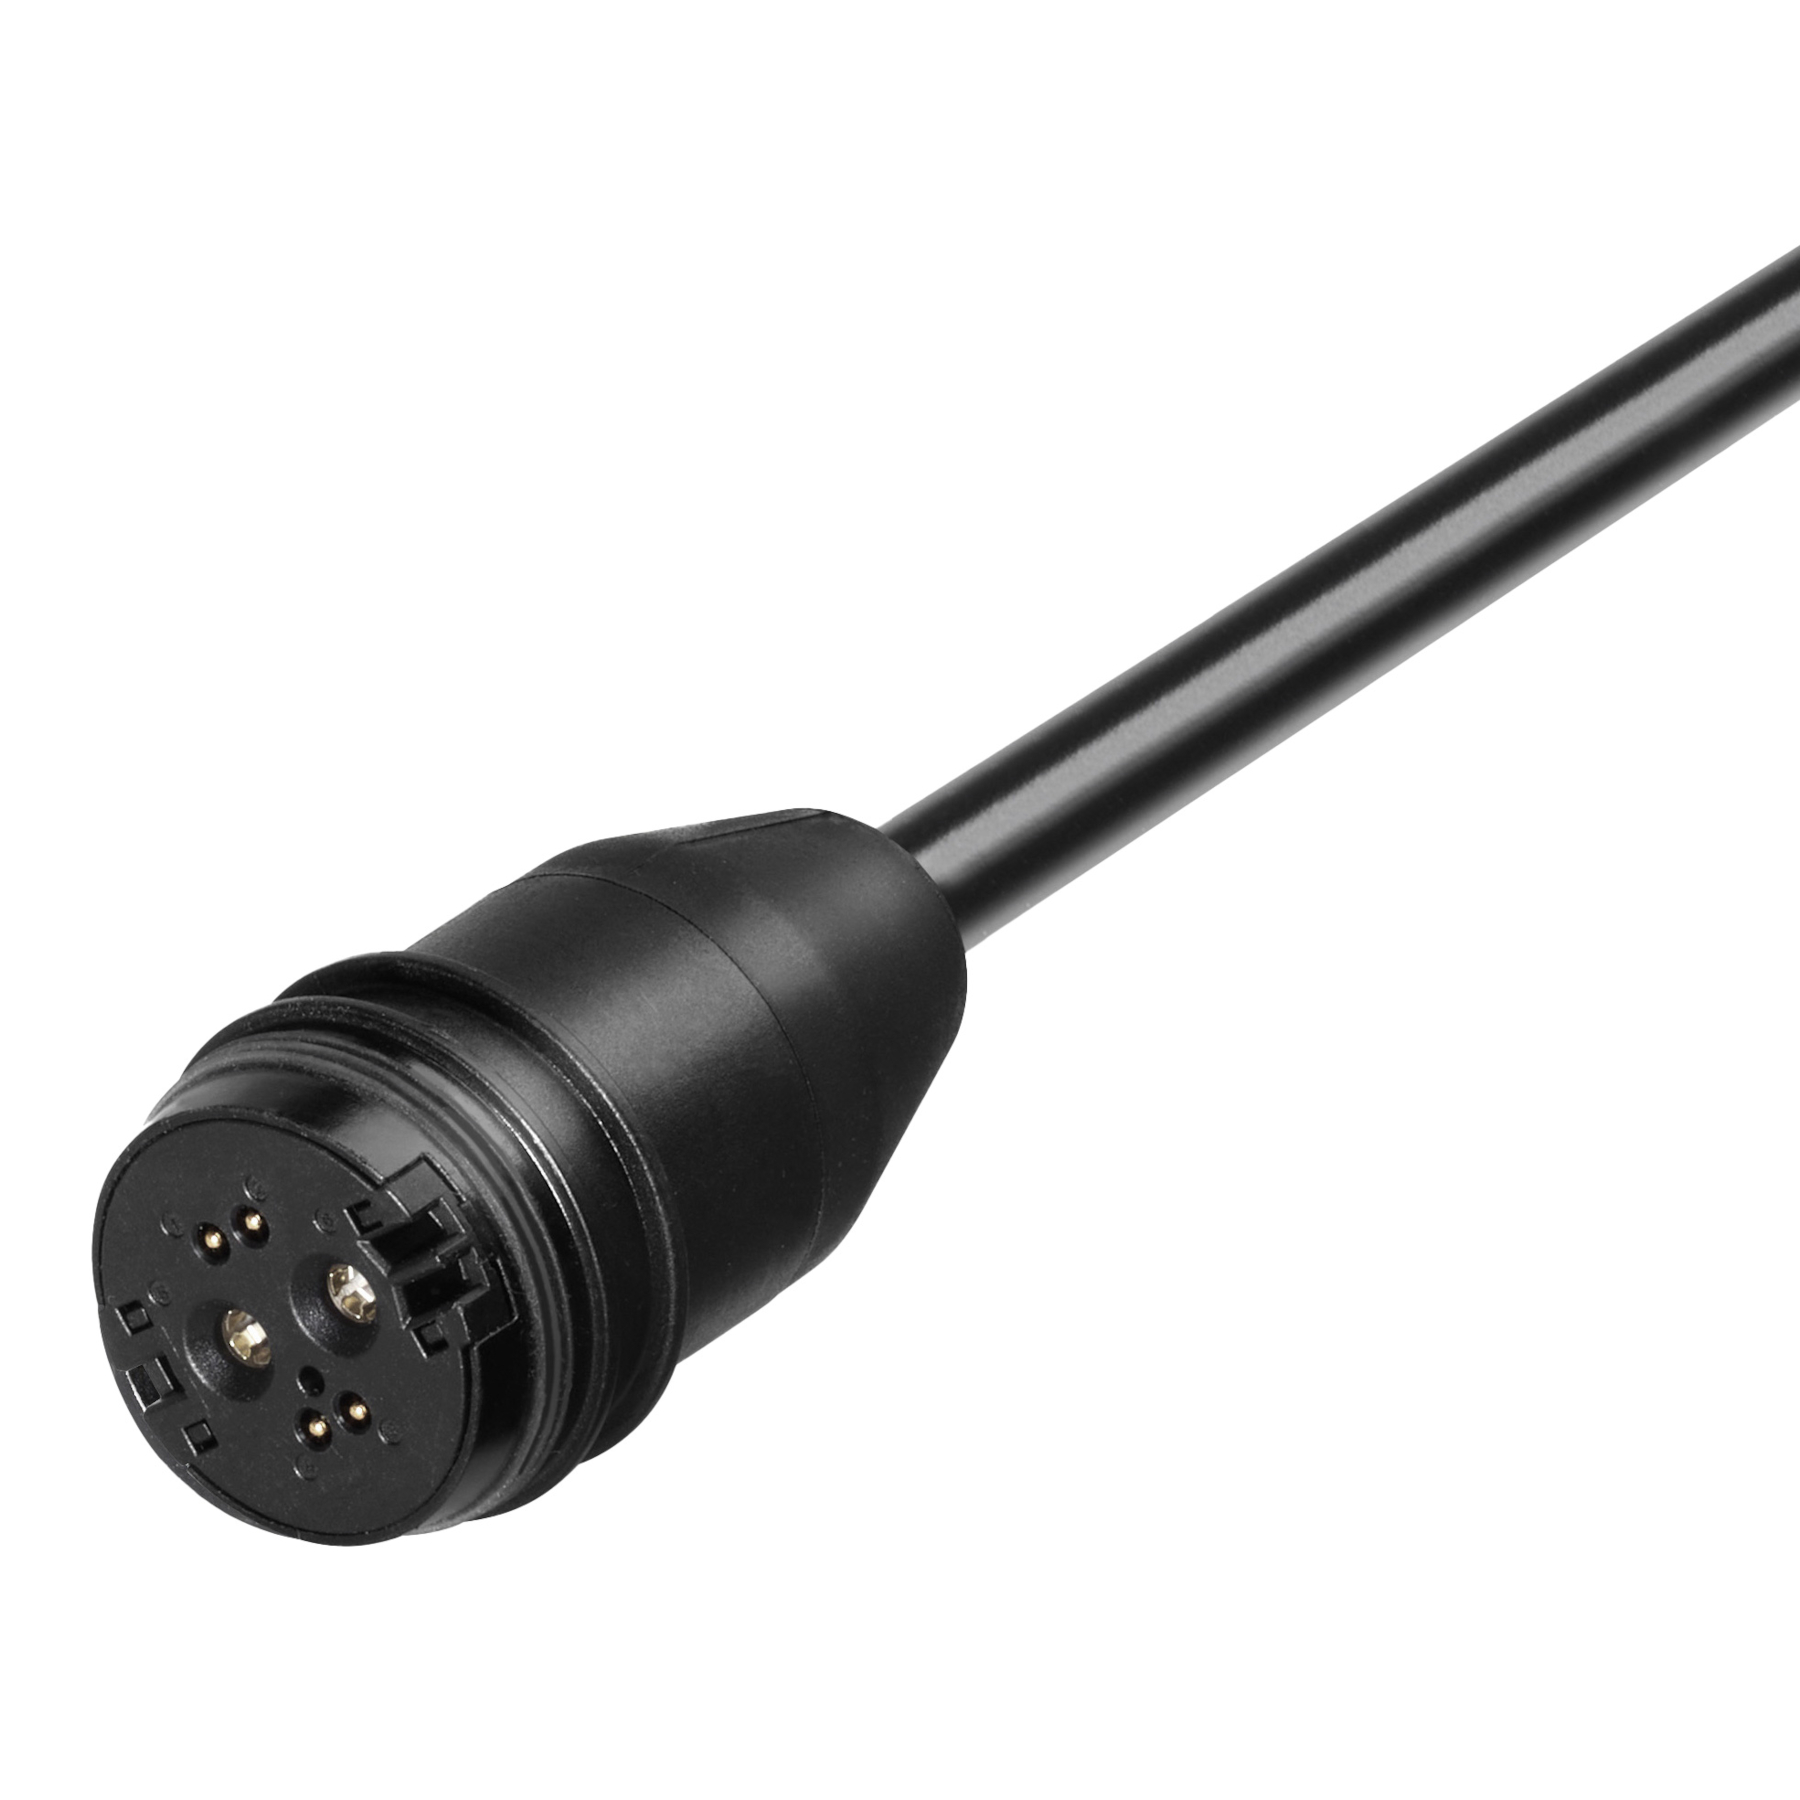 Productfoto van ONgineer Secondary Cable for LiON Smart Charger - Rosenberger C (Specialized)